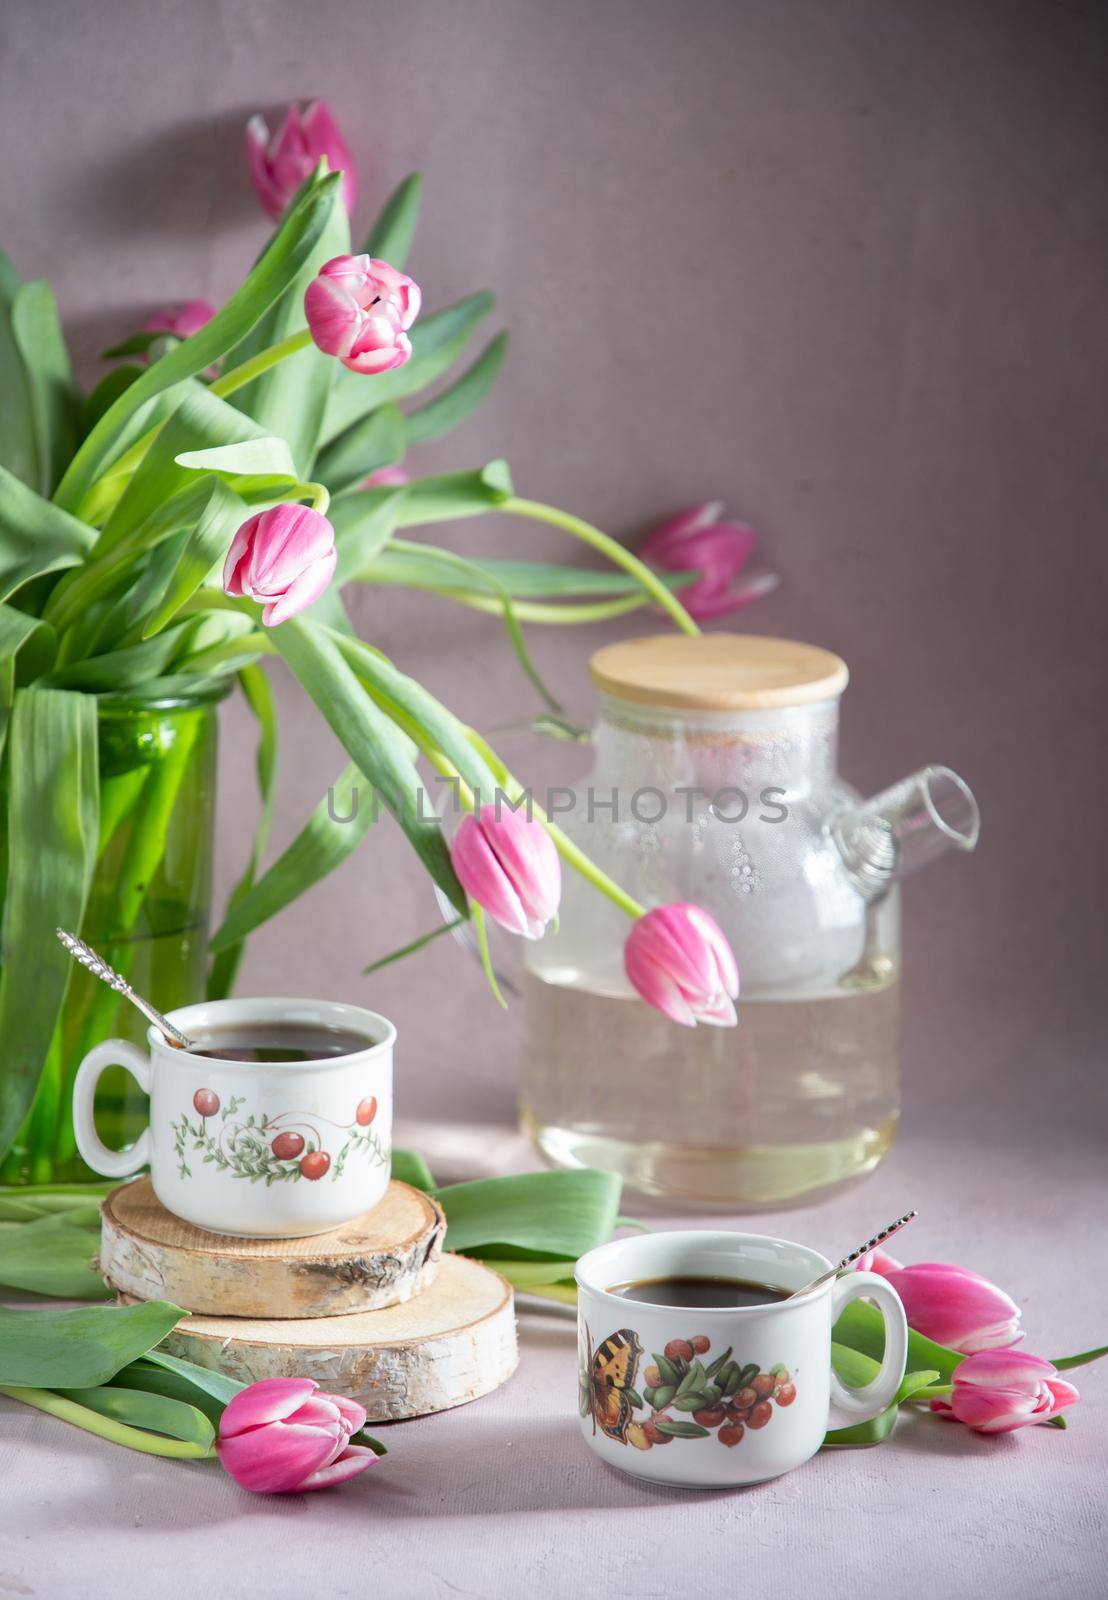 Still life, concept of early spring breakfast with coffee or tea and cupcake on the background of a bouquet of tulips and daffodils